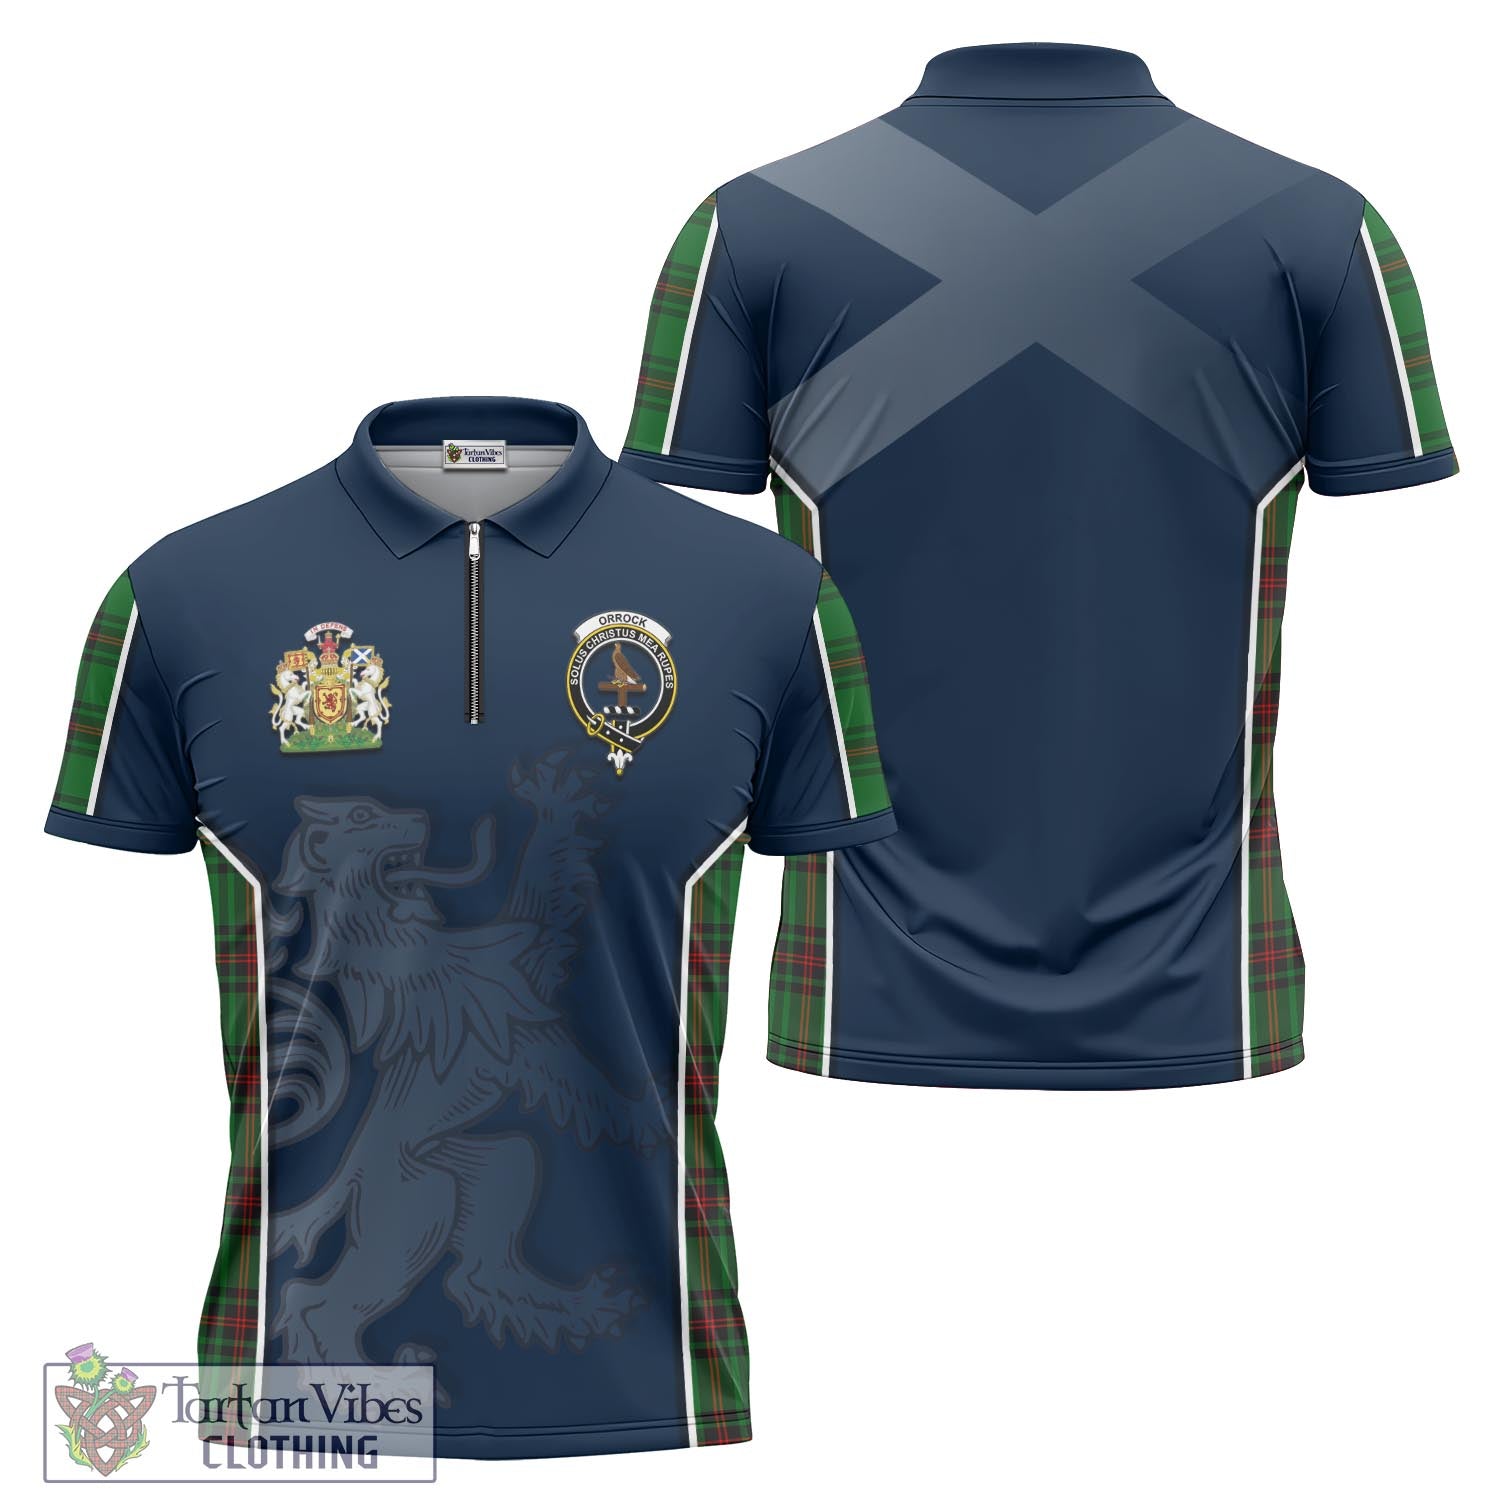 Tartan Vibes Clothing Orrock Tartan Zipper Polo Shirt with Family Crest and Lion Rampant Vibes Sport Style